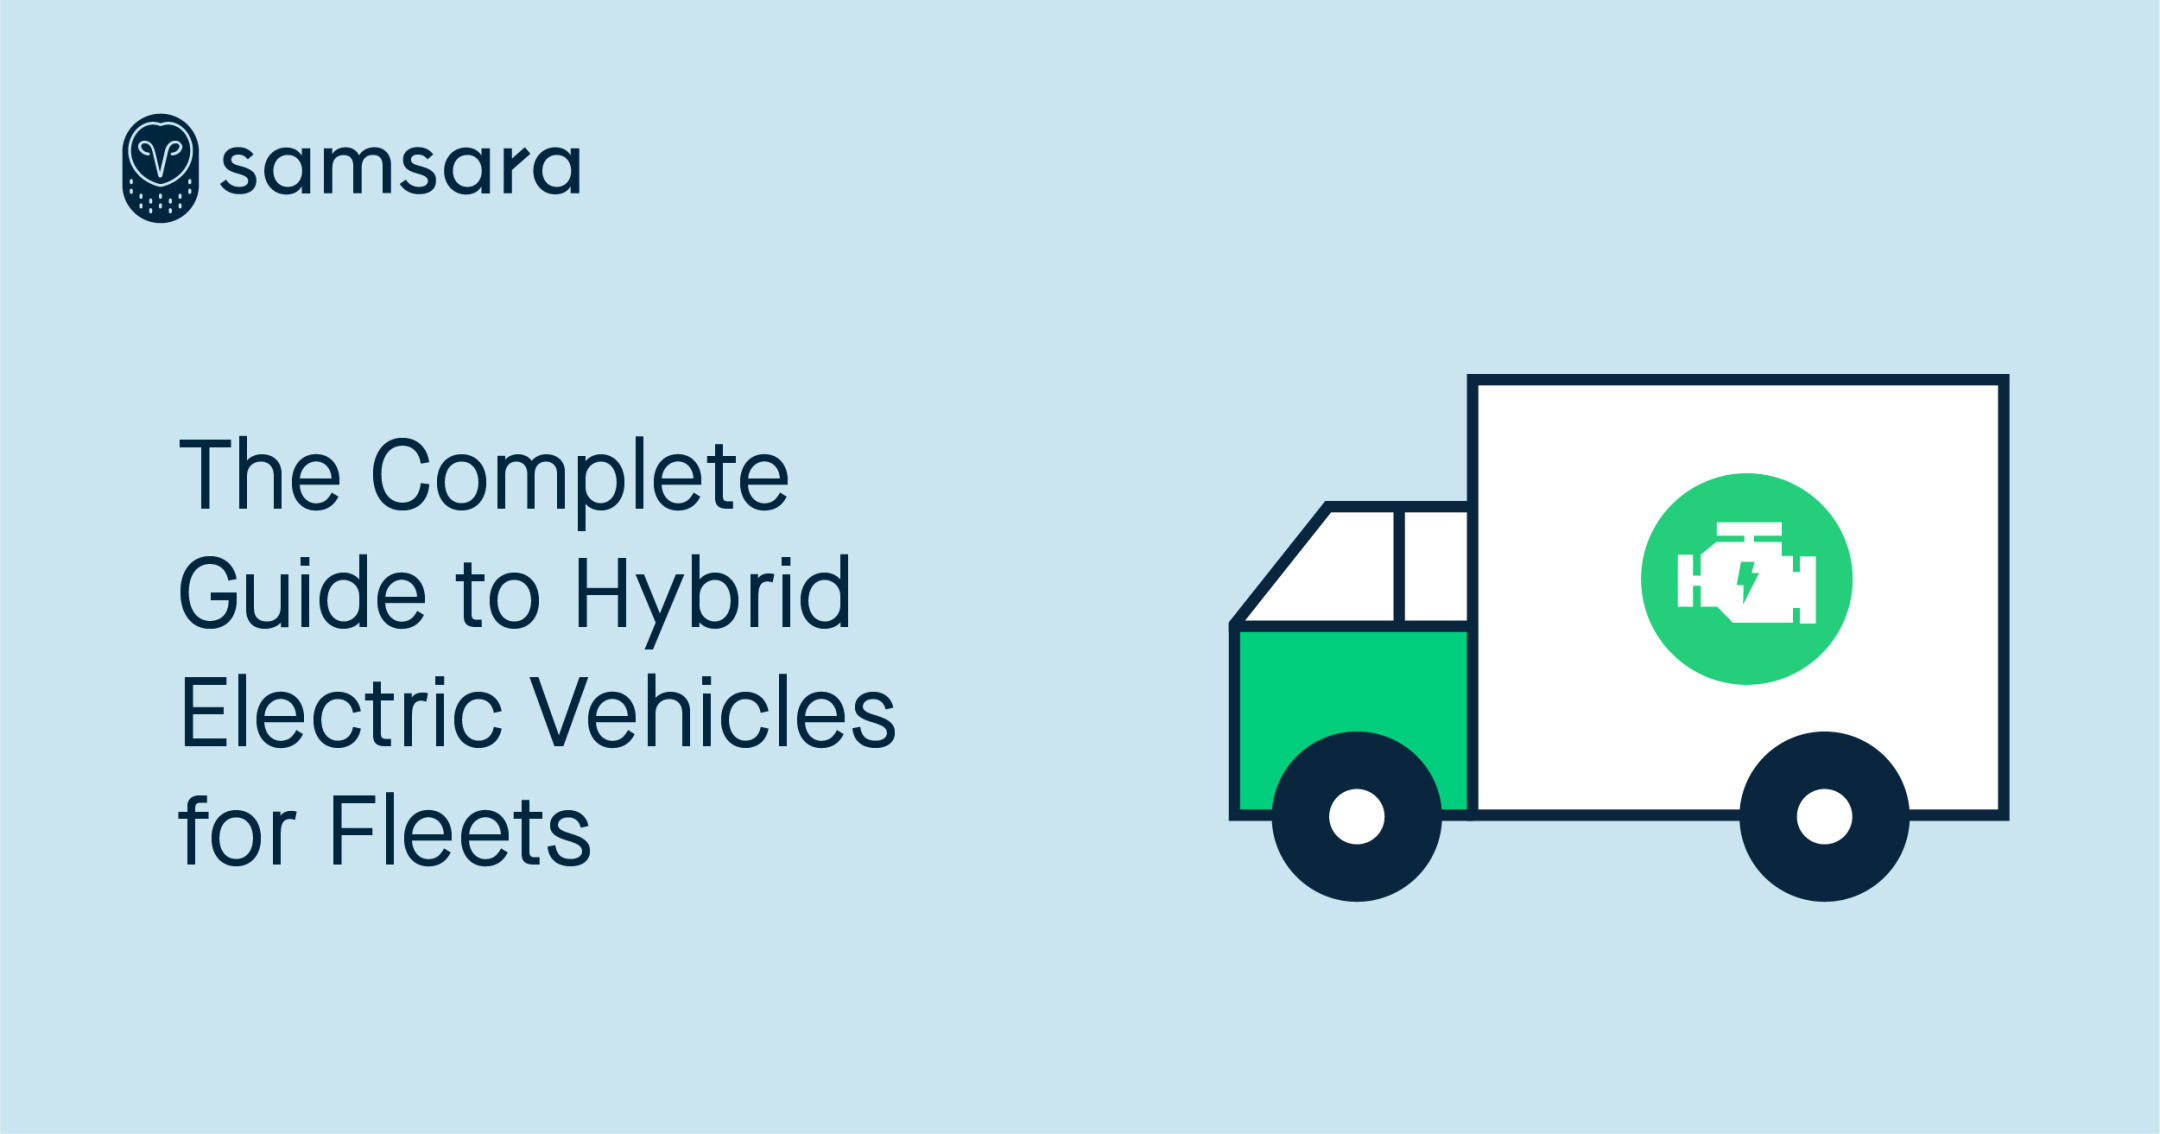 The Complete Guide to Hybrid Electric Vehicles for Fleets